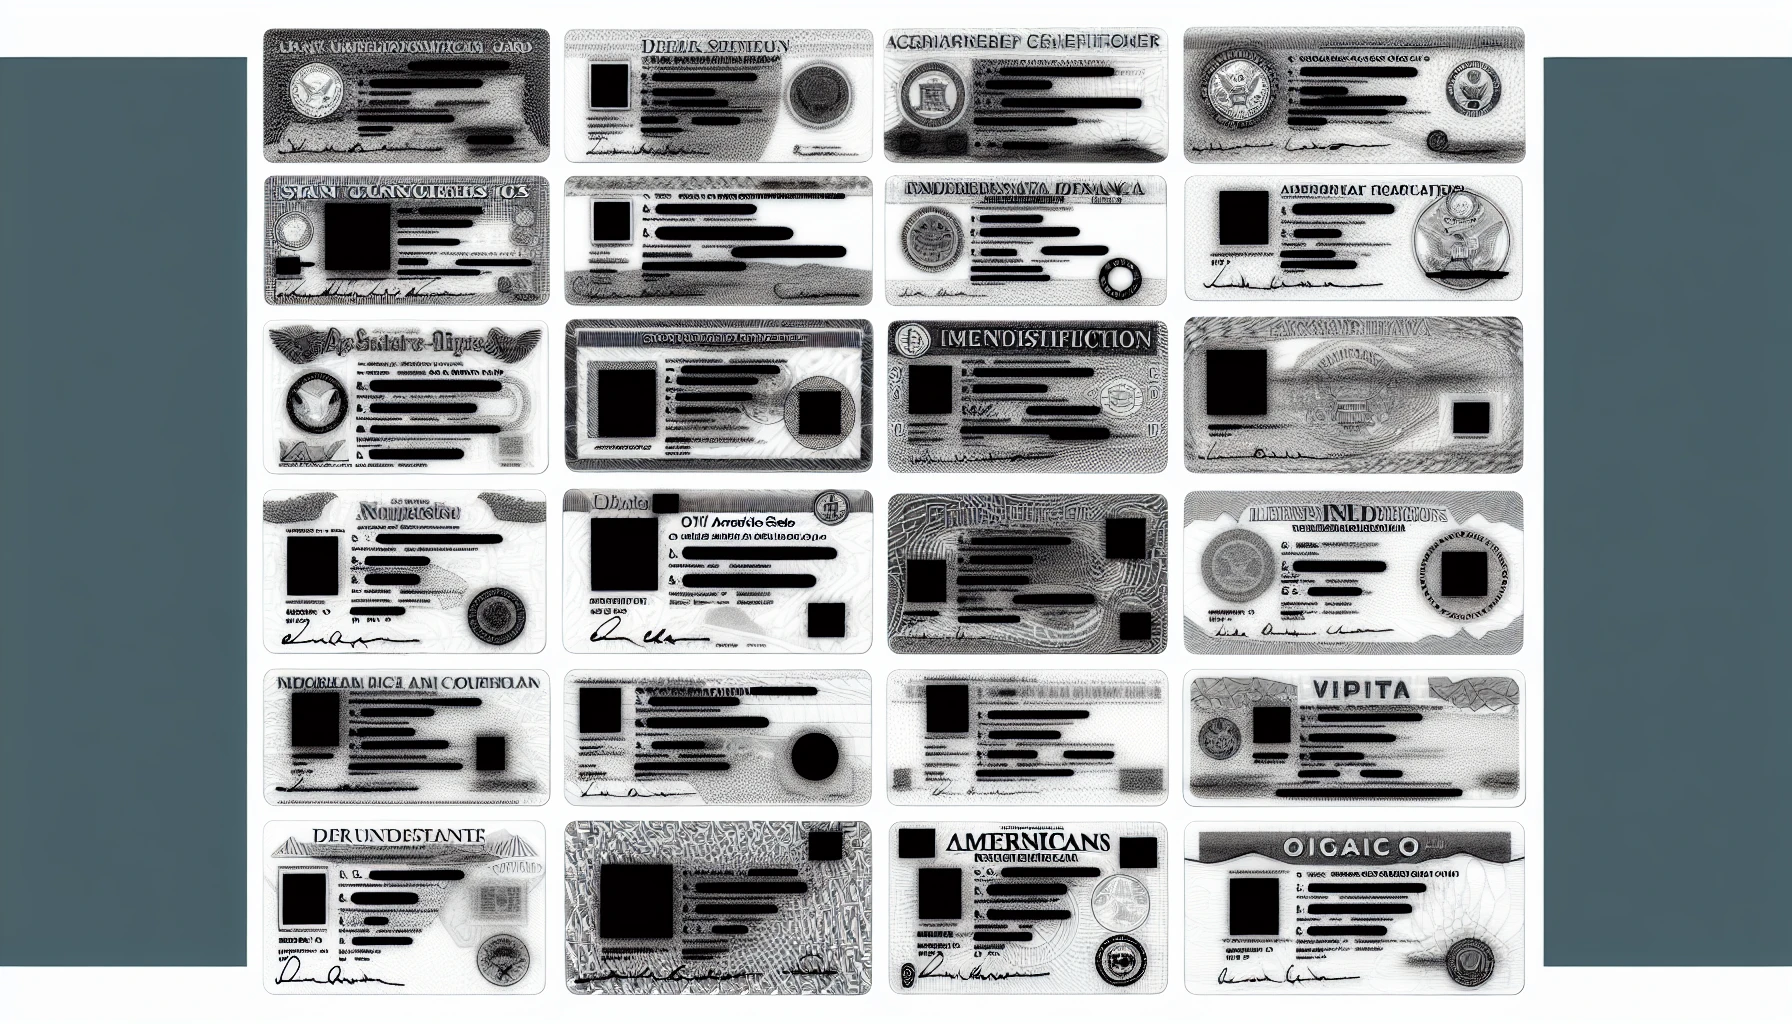 Various state identification cards